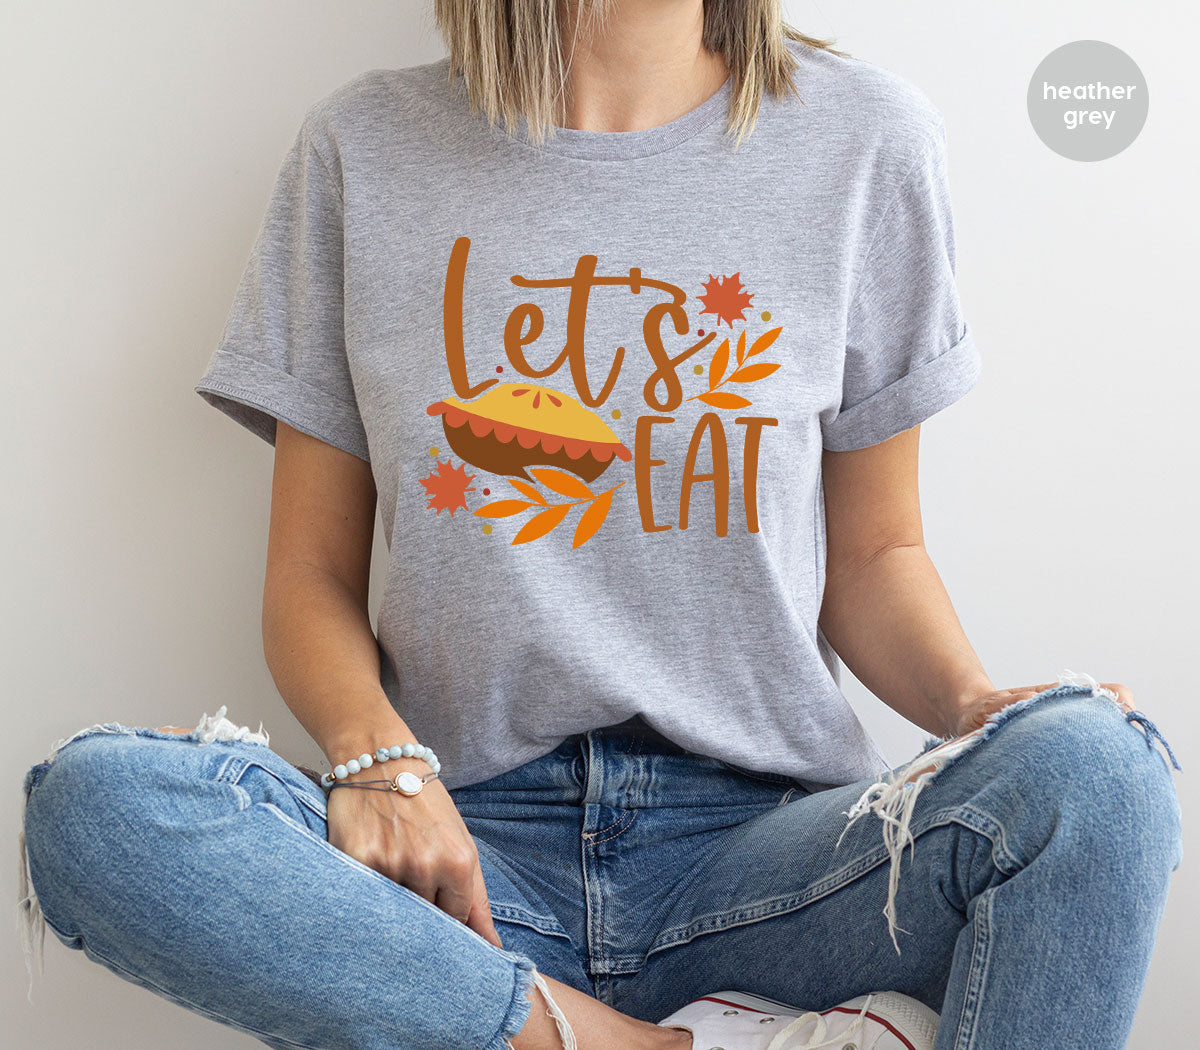 Funny Thanksgiving Shirts, Pumpkin Pie Graphic Tees, Fall Crewneck Sweatshirt, Gift for Her, Autumn Leaves T-Shirt, Matching Family Clothes